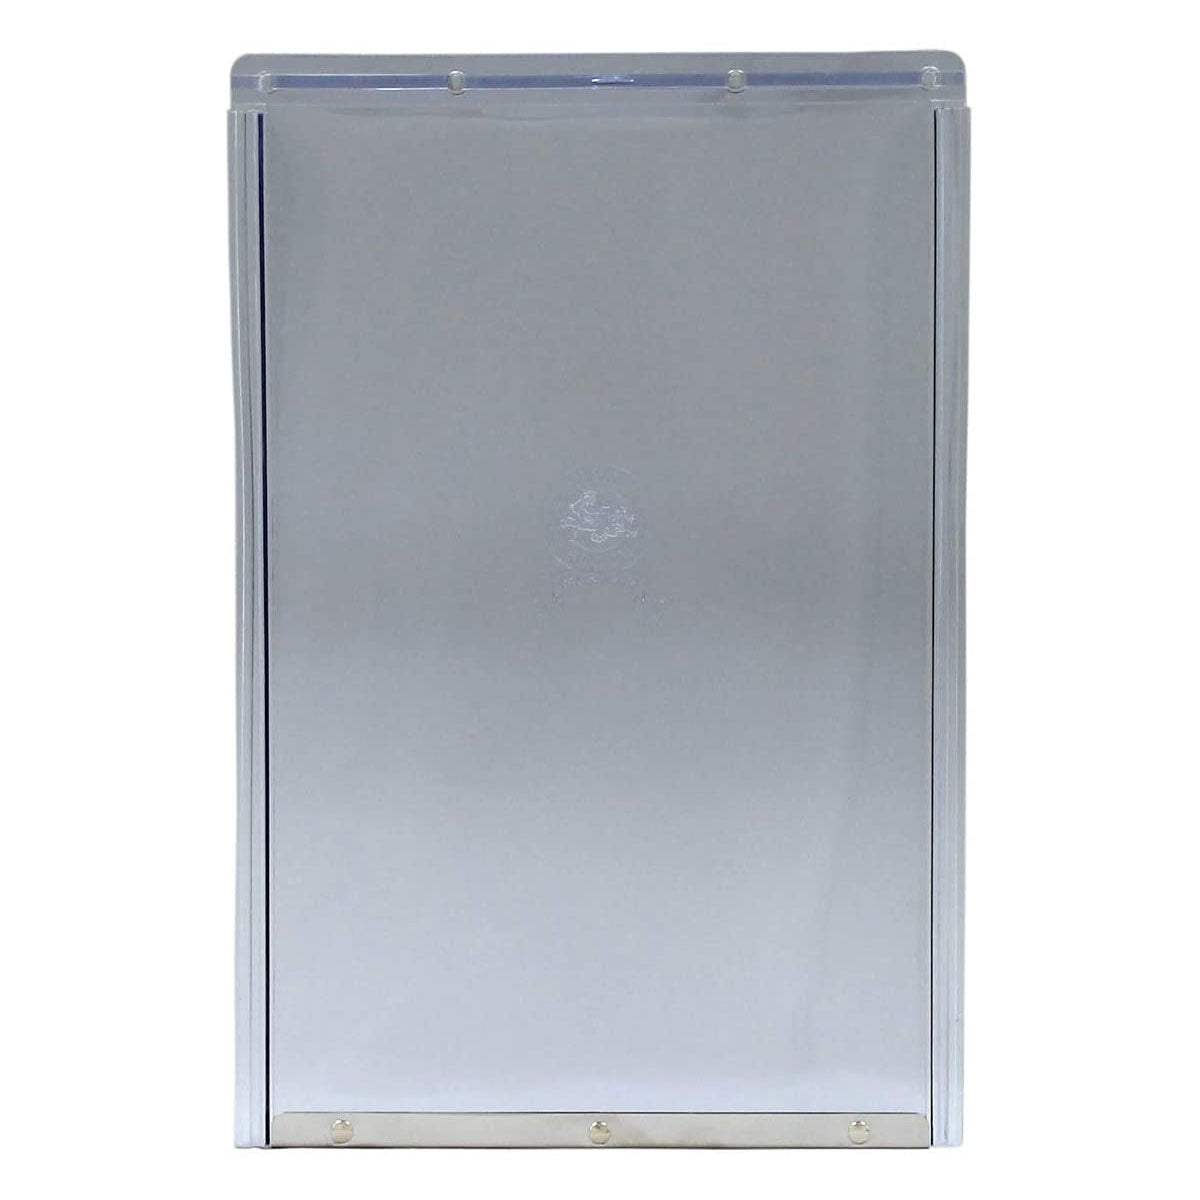 Ideal Pet Products Vinyl Replacement Flap Extra Large Tinted 0.1" x 10.5" x 15"